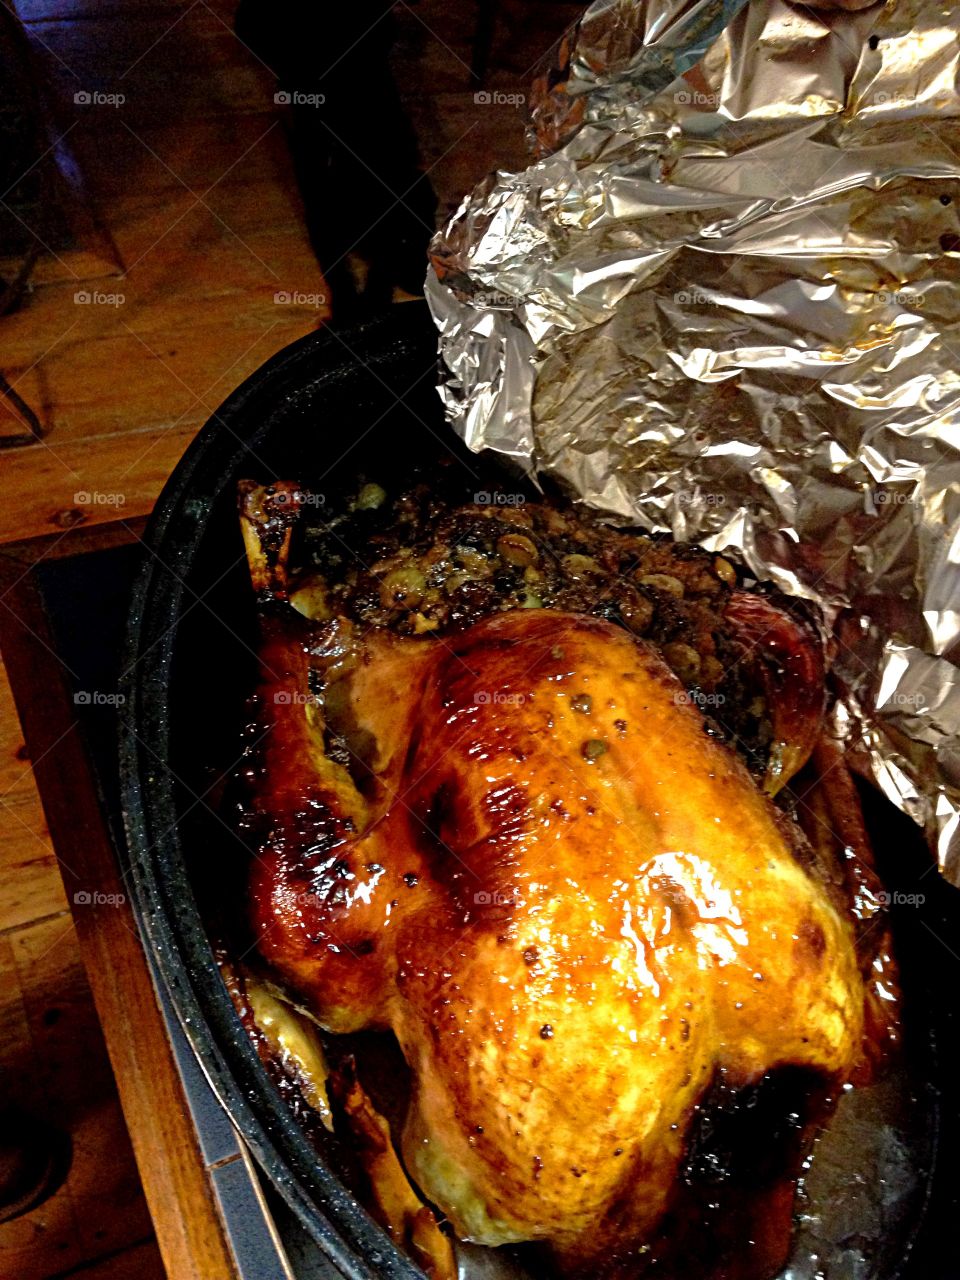 The Turkey. Roasted turkey just out of oven